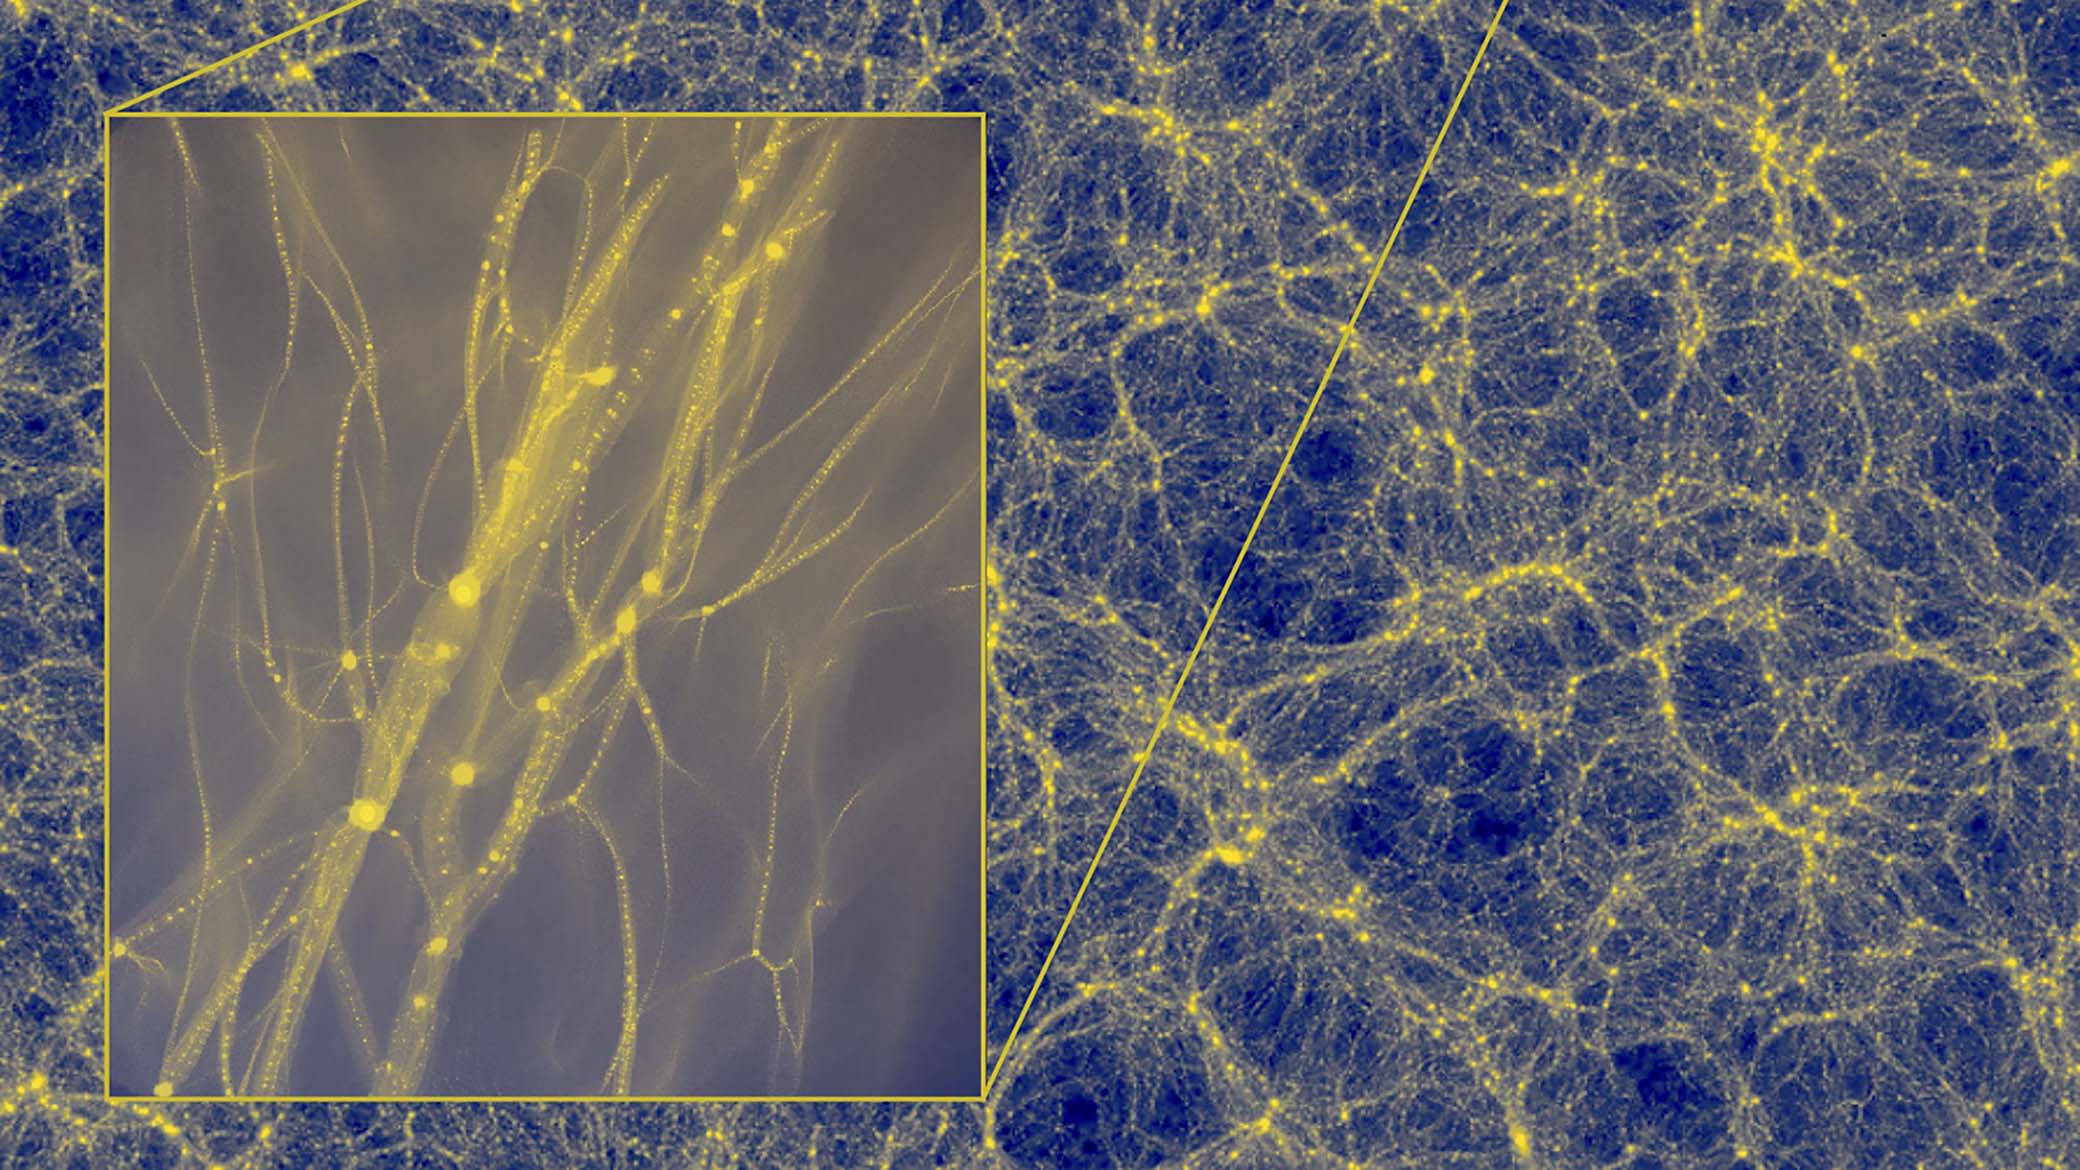 "Zoomed in, computer-generated simulation of the distribution of dark matter in the universe, also referred to as the 'cosmic web.' Top right inset: The primary magnification for the project reveals spherical blobs that appear scattered throughout the image and are identified by scientists as dark matter haloes. Bottom left inset: The highest level of magnification revealed tiny yellow blobs, or Earth-mass dark matter haloes as they would appear in the universe today. While they exist in the corresponding region of the background, they are visible only after zooming in several times. This is the first time these objects have ever been produced in a numerical simulation."